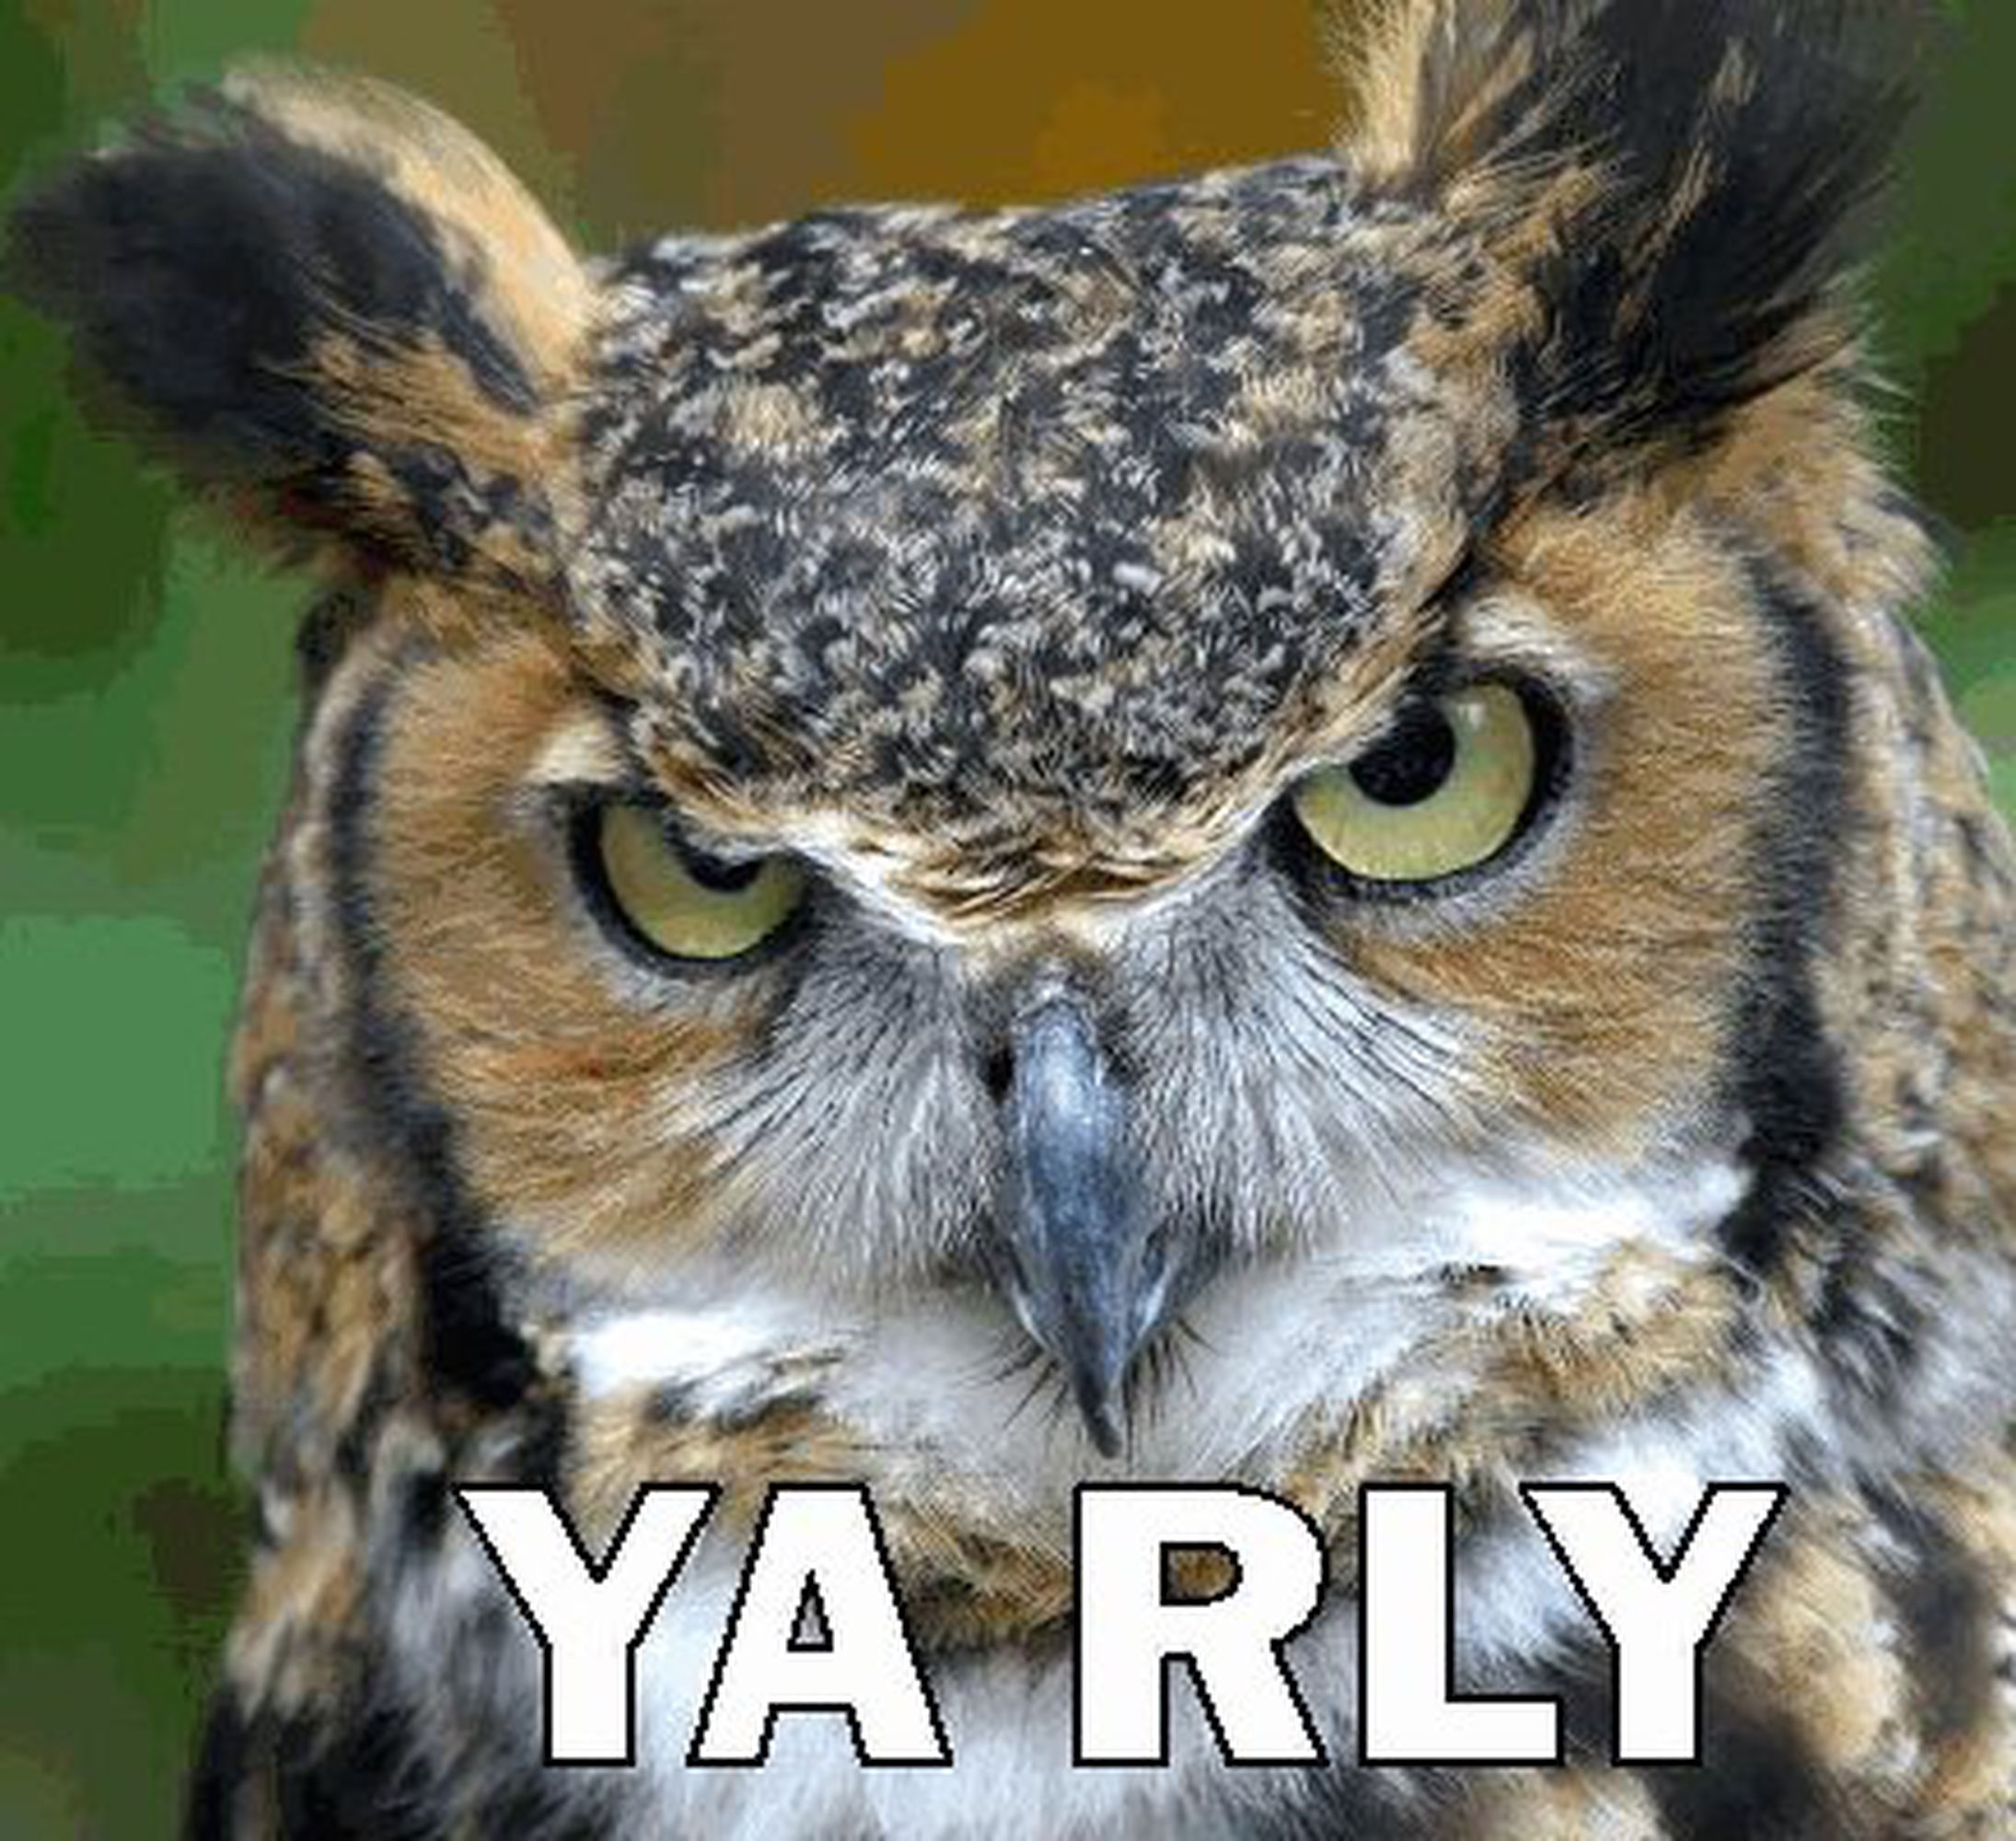 Photo of a great horned owl with the caption "ya rly"